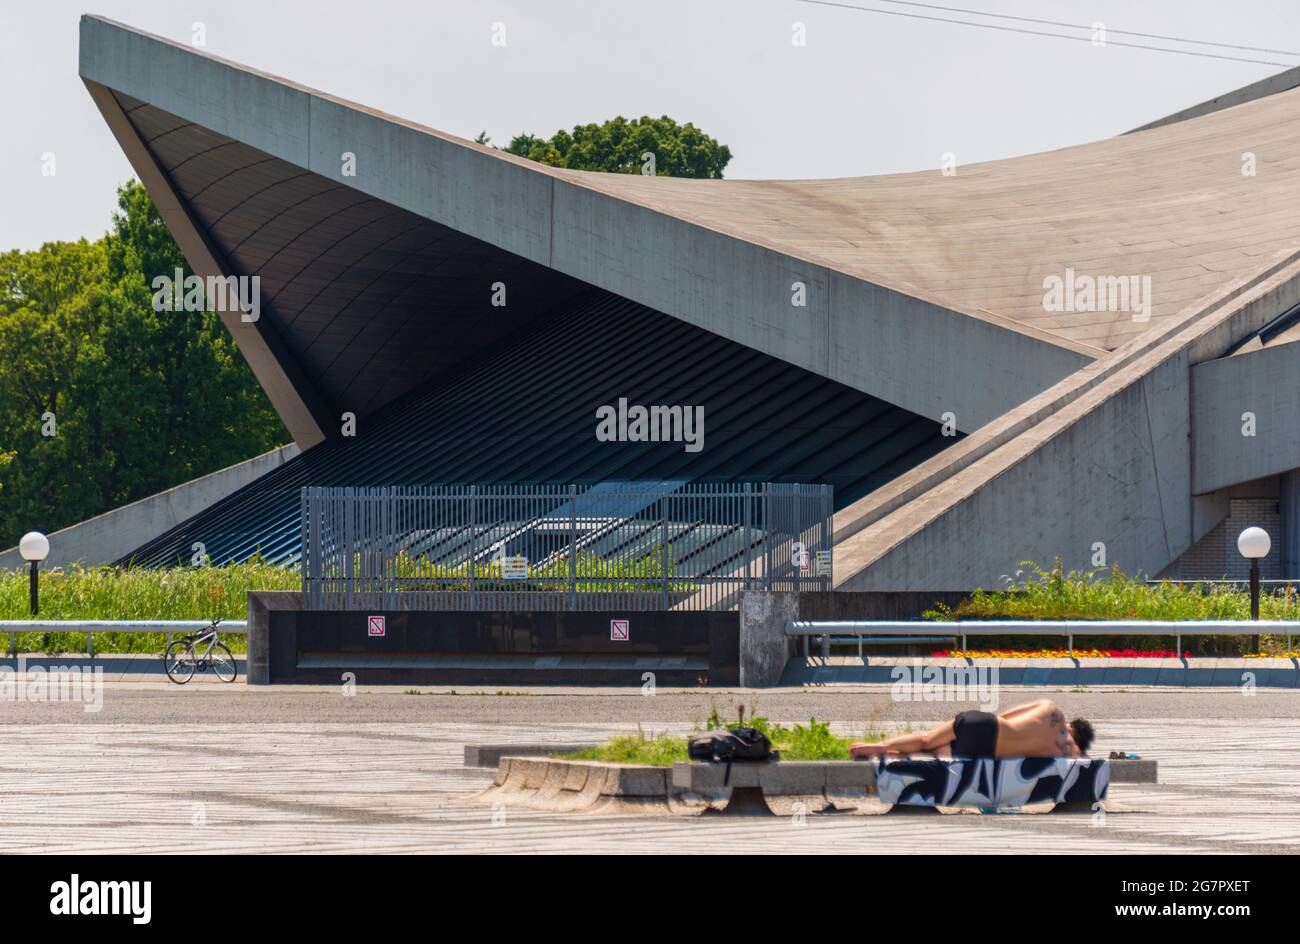 A man sunbathes in front of the gymnasium inside Komazawa Olympic Park, Tokyo on 10 June 2021. The park was built for the 1964 Tokyo Olympics. Robert Gilhooly photo Stock Photo